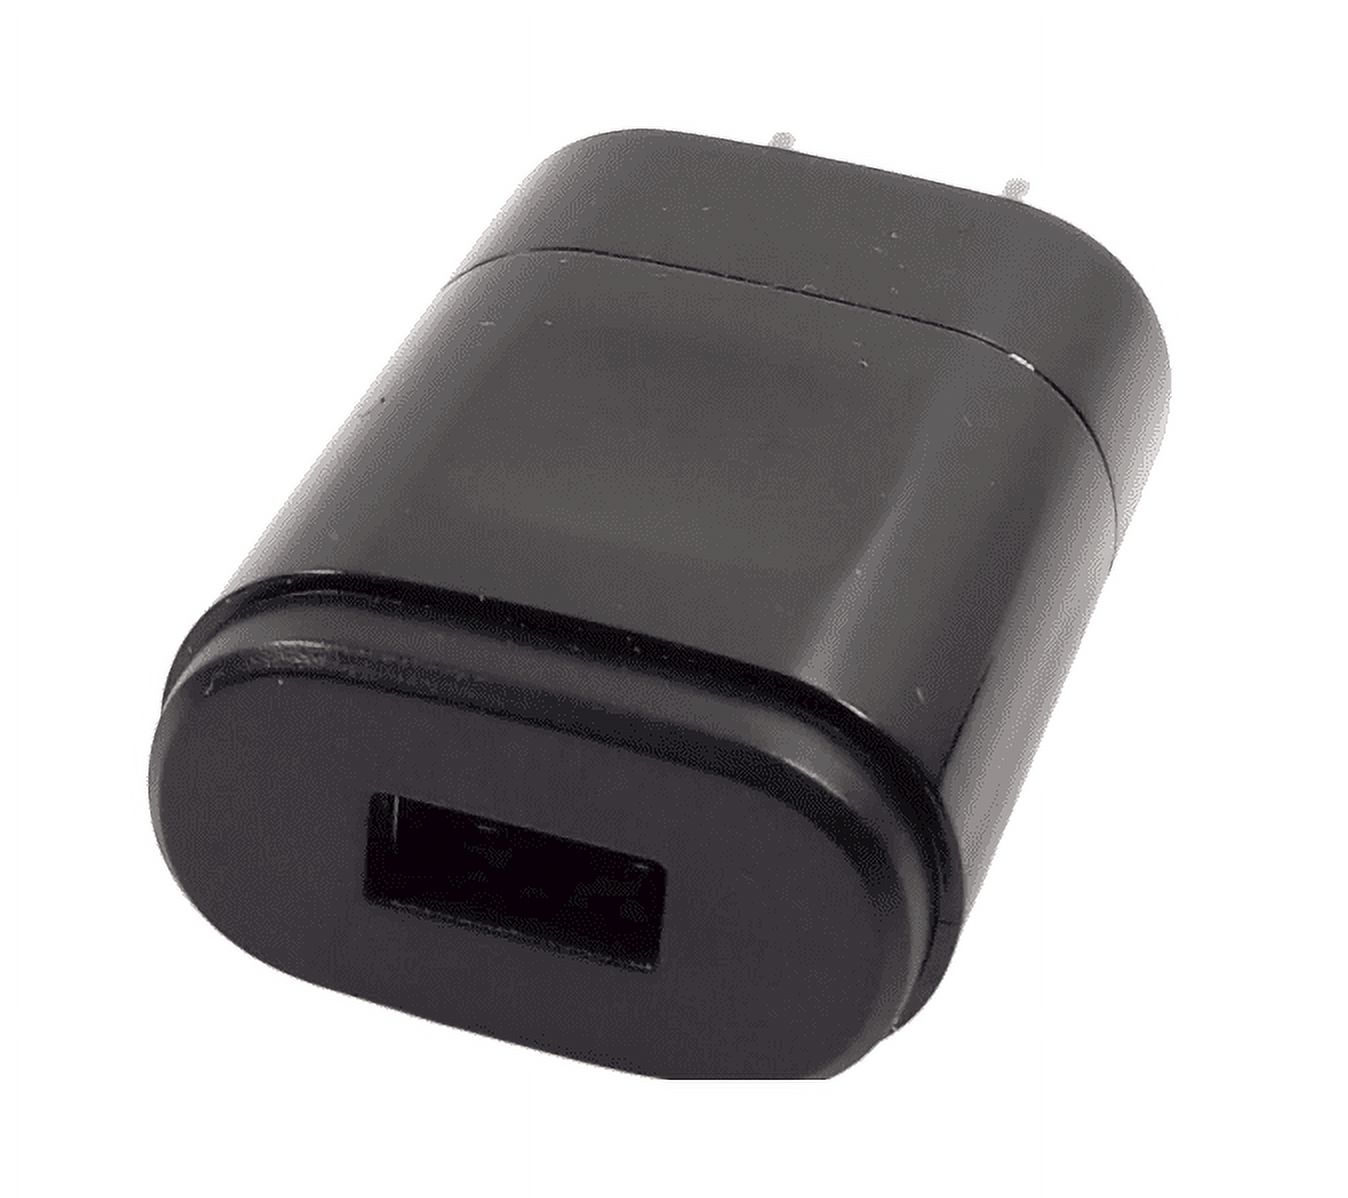 LG Universal USB AC Travel Wall Charger Power Adapter Head MCS-01WR - image 3 of 4